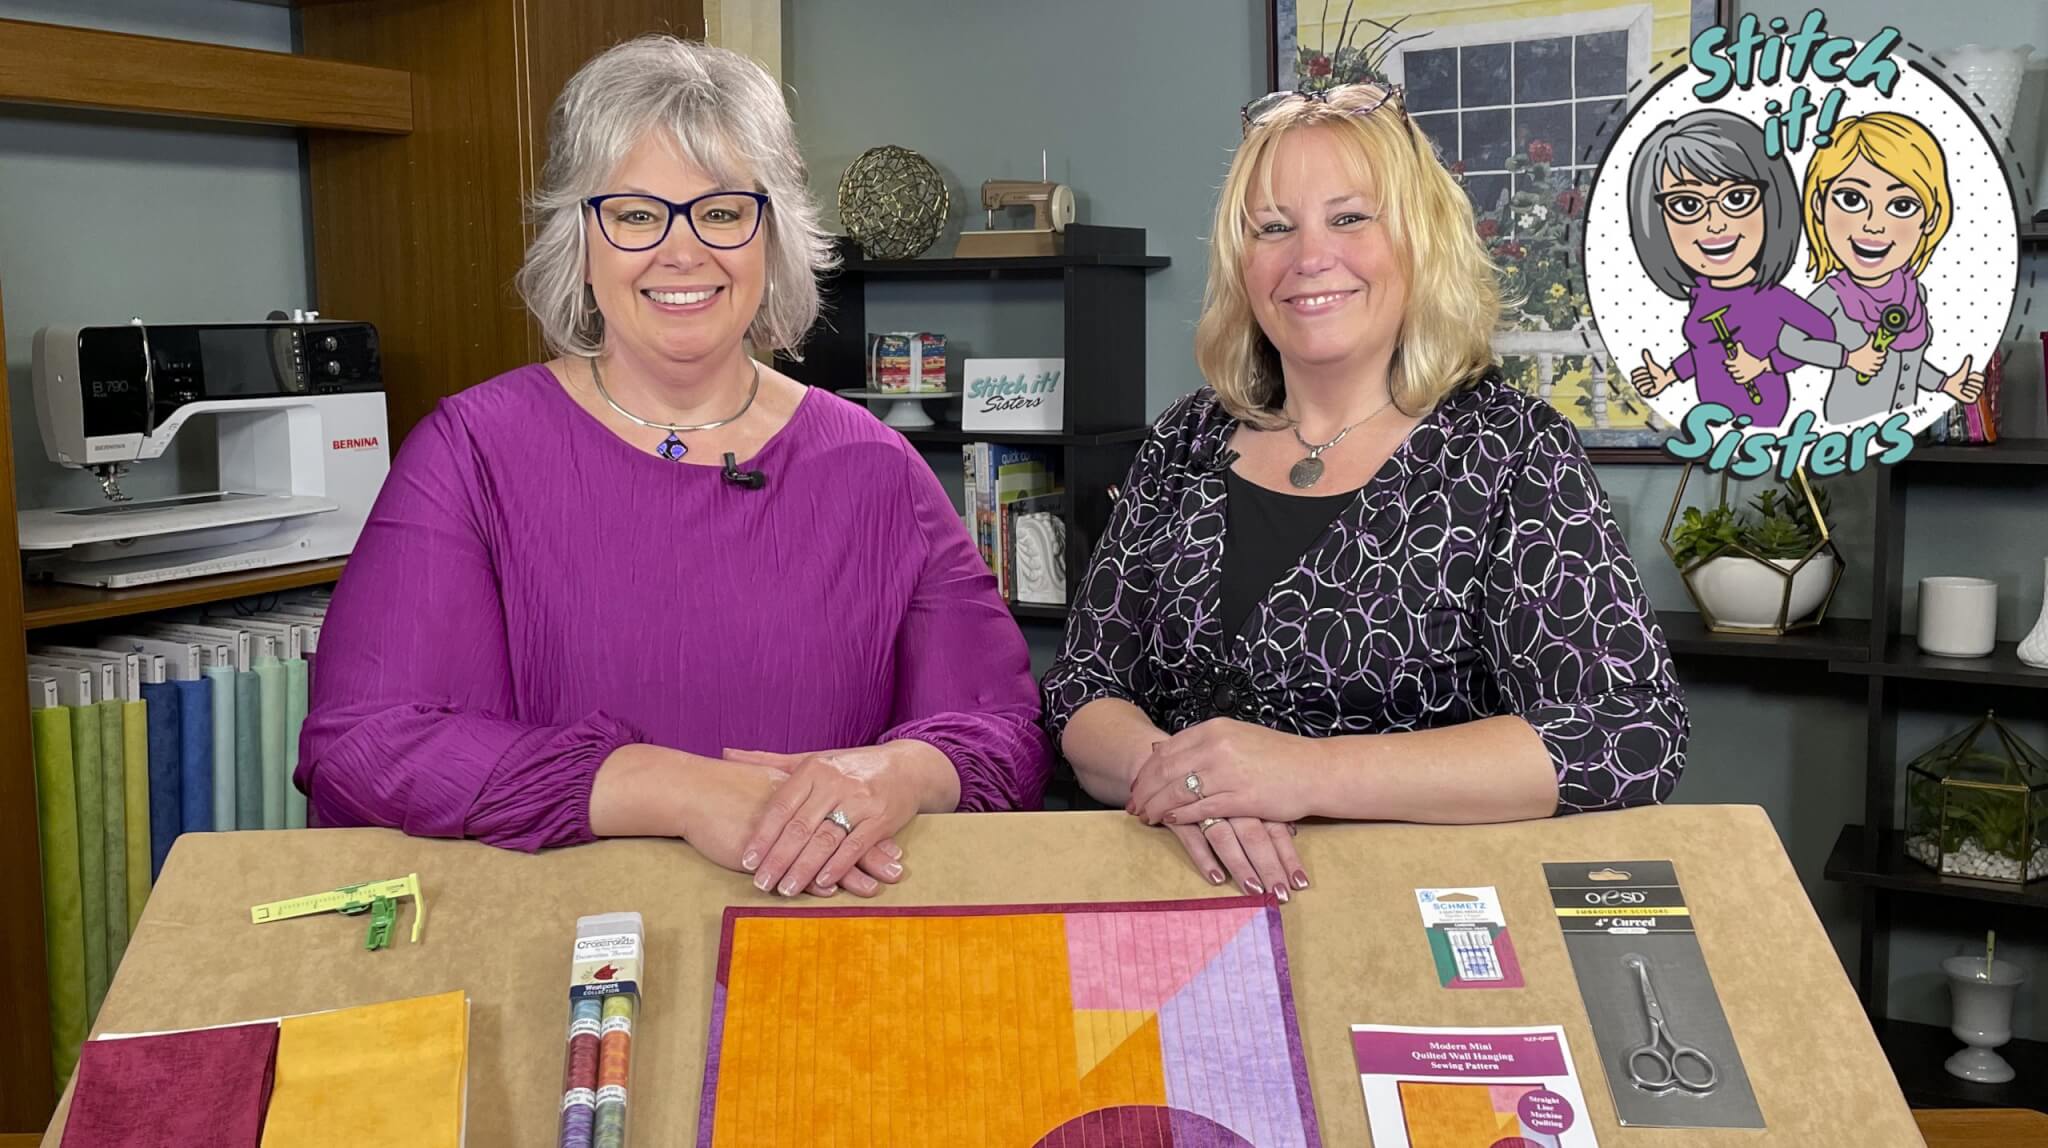 Stitch it! Sisters NEW Ultimate Straight Line Machine Quilting Tutorial by the Stitch it! Sisters at Nancy Zieman Productions